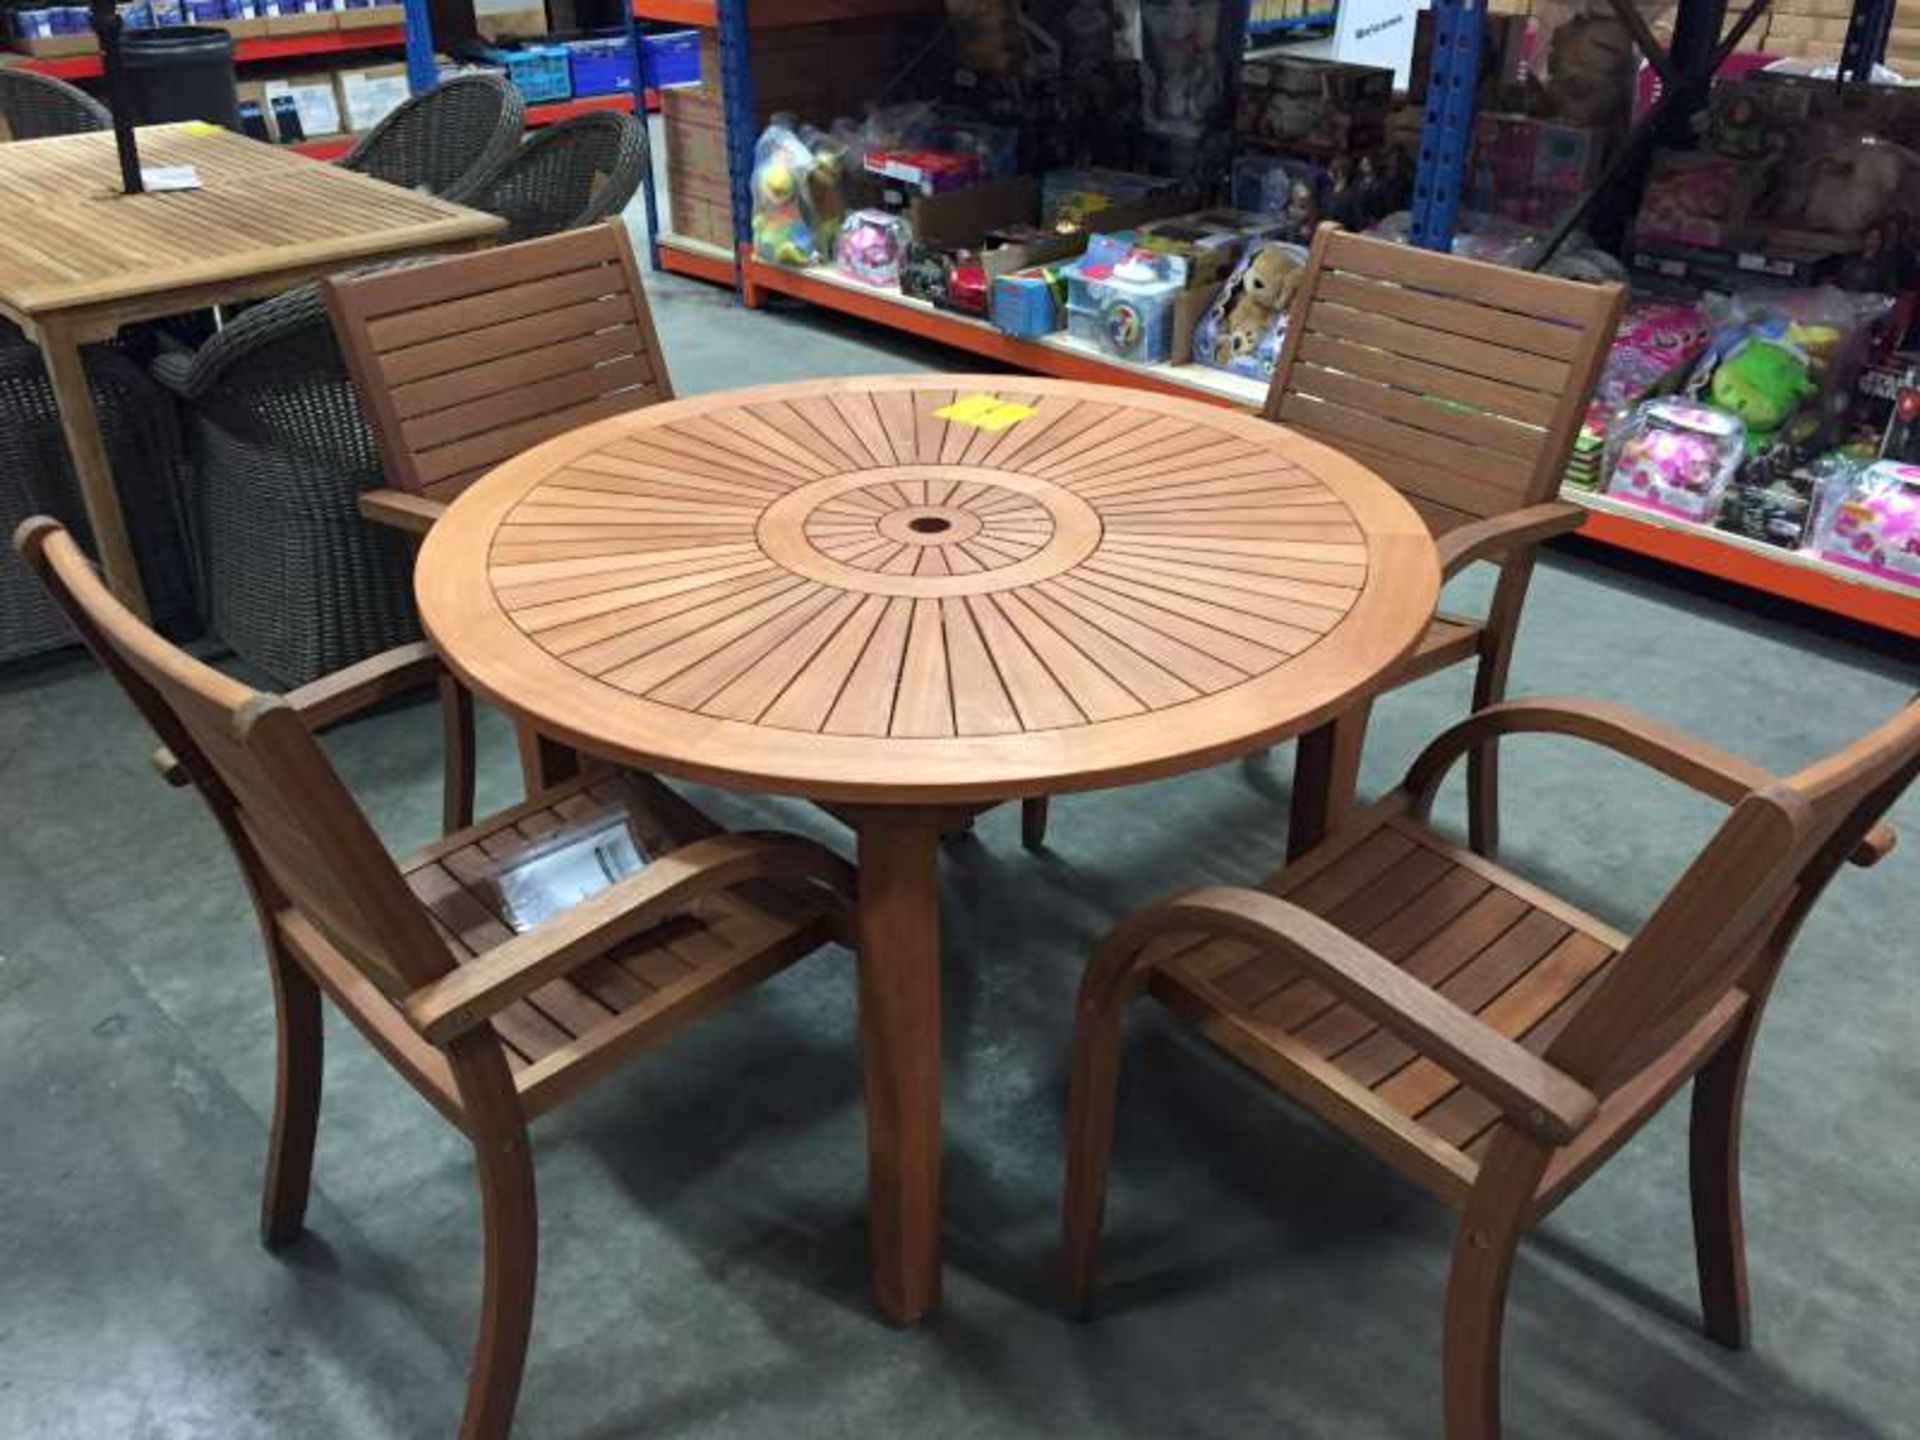 BRAND NEW BOXED ALMERIA ROUND GARDEN TABLE WITH 4 X ALMERIA STACKING CHAIRS